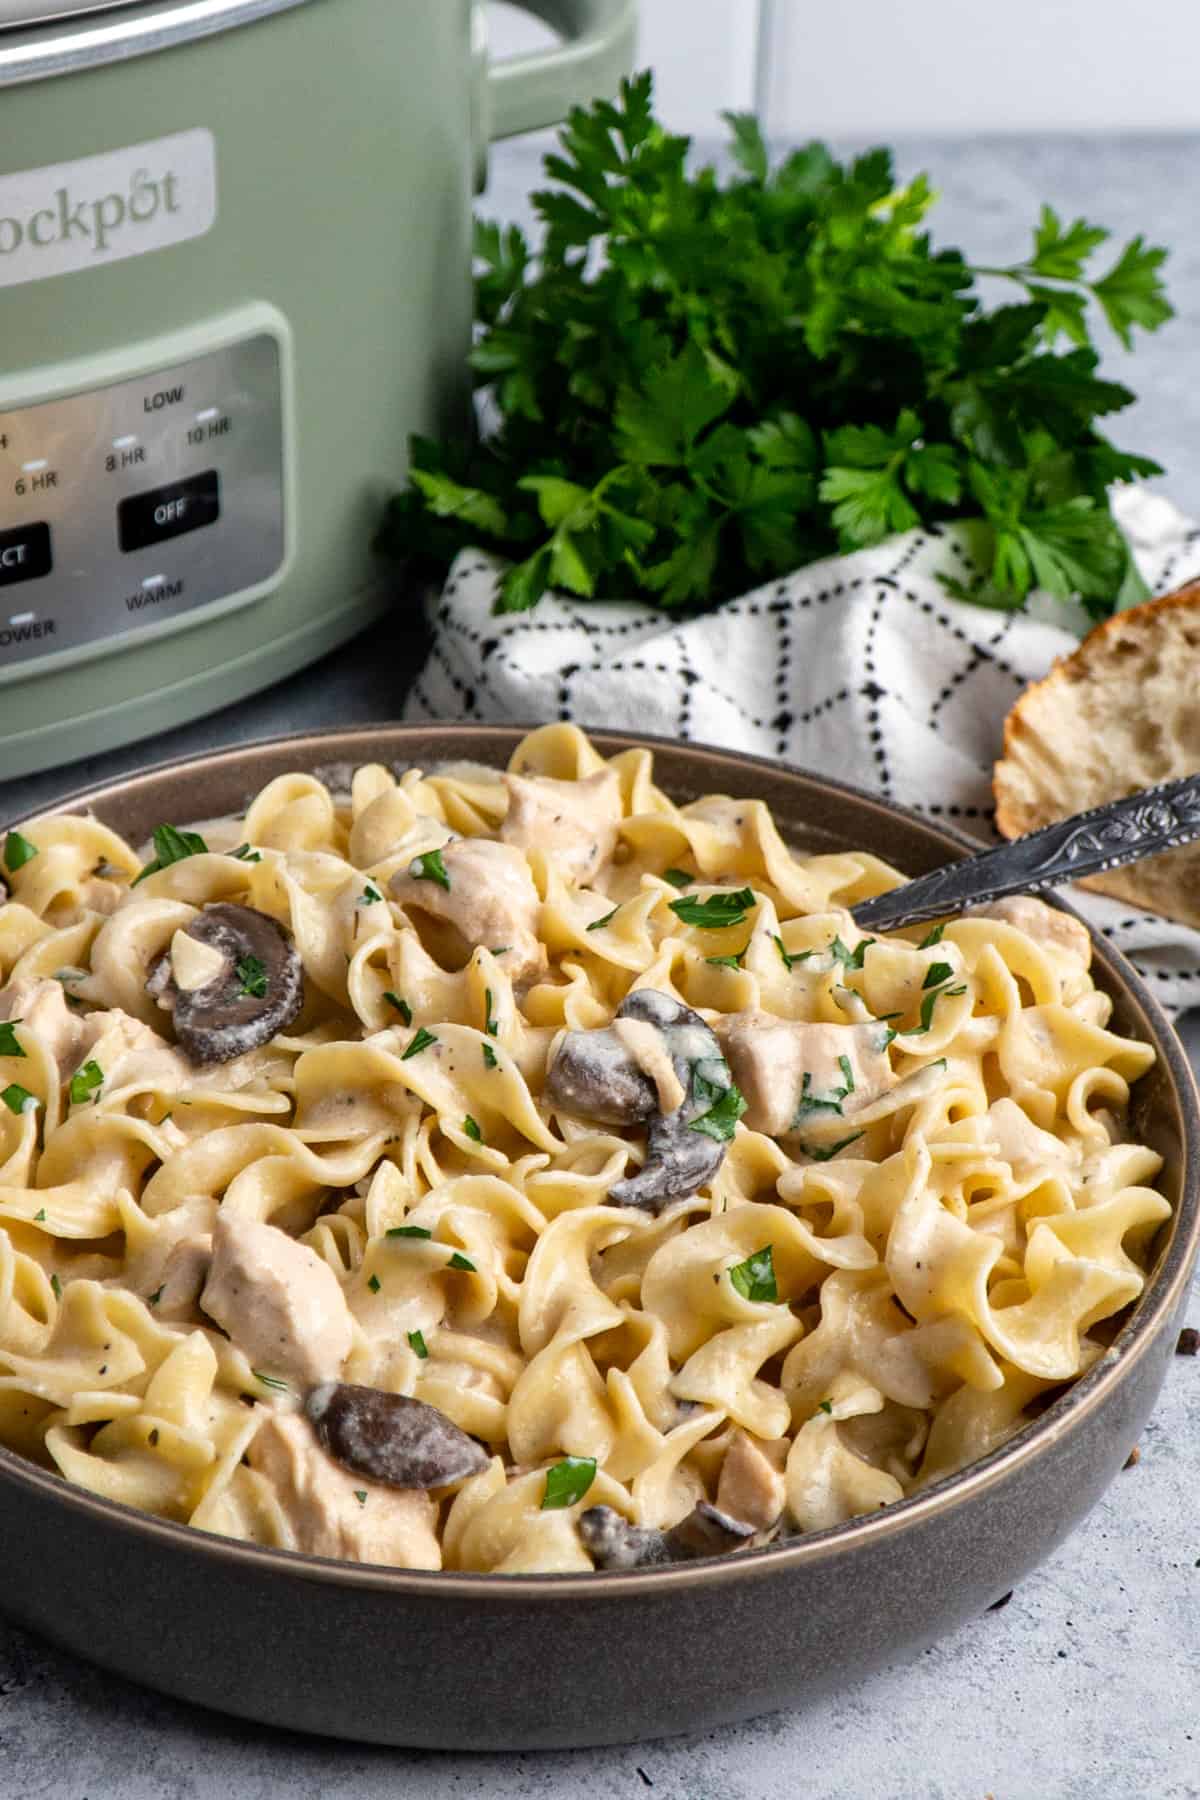 Chicken stroganoff in a gray bowl with a crock pot and parsley in the background.